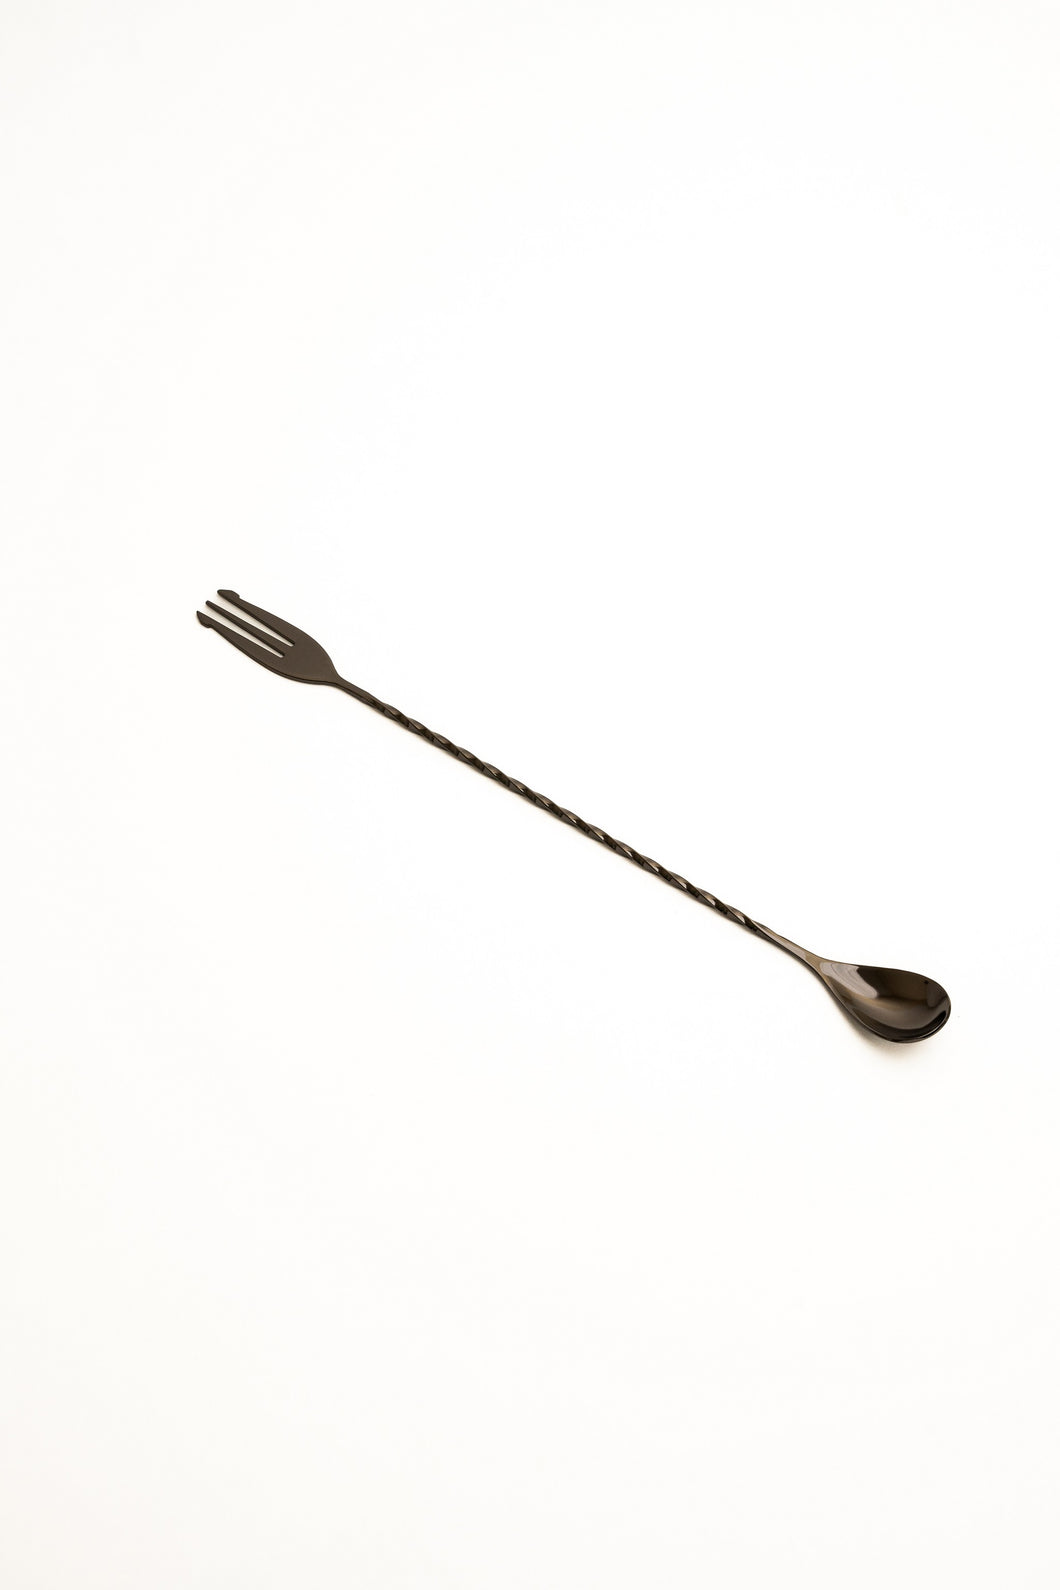 Barspoon - with fork 30cm